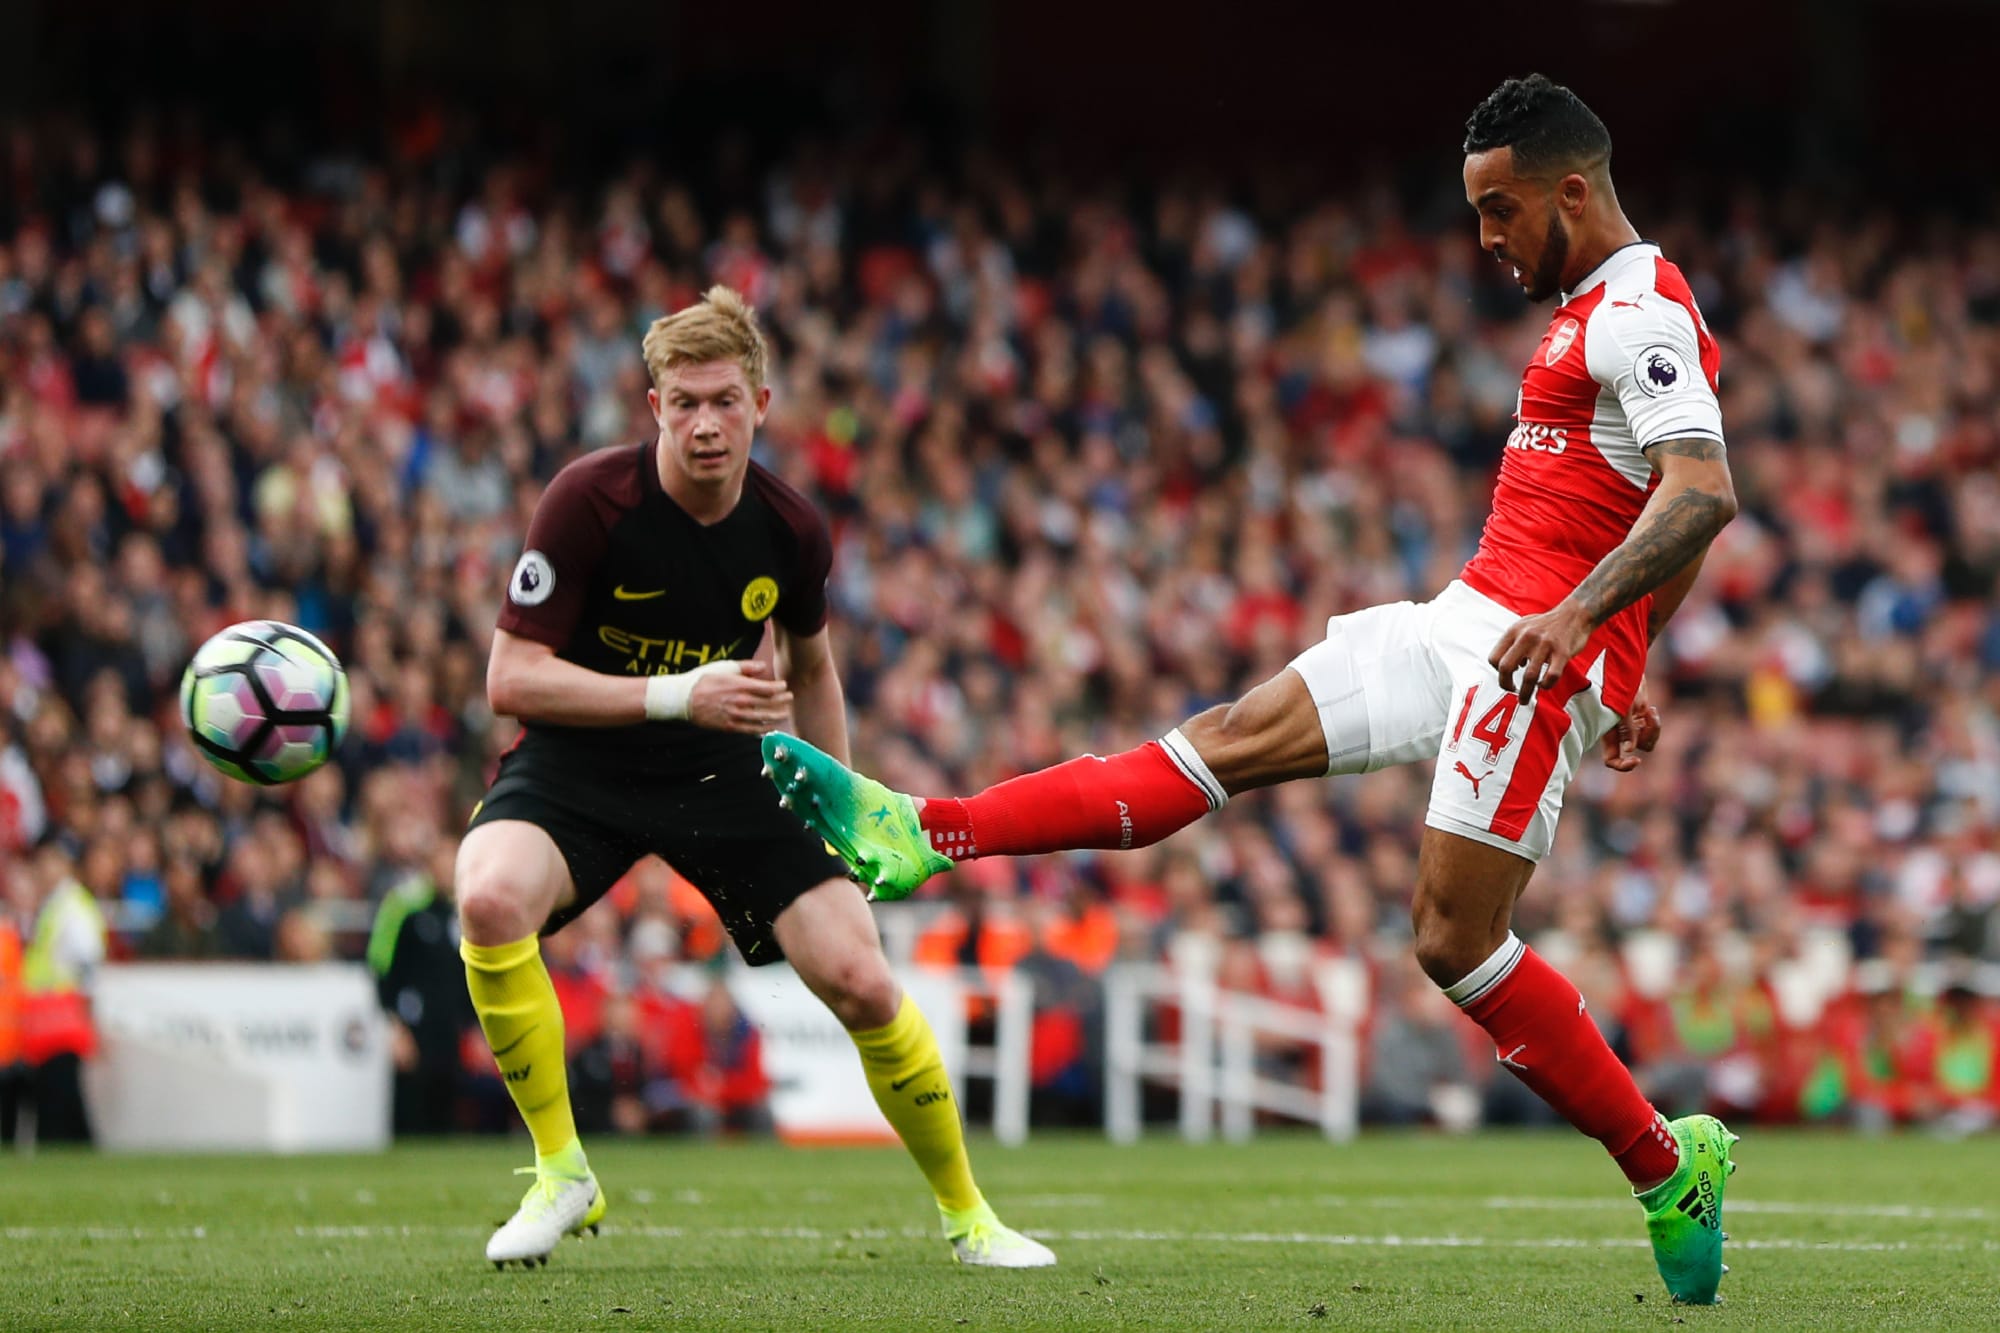  Arsenal's Theo Walcott (right) shoots past Manchester City's Kevin De Bruyne (left) during the Premier League match at Emirates Stadium.